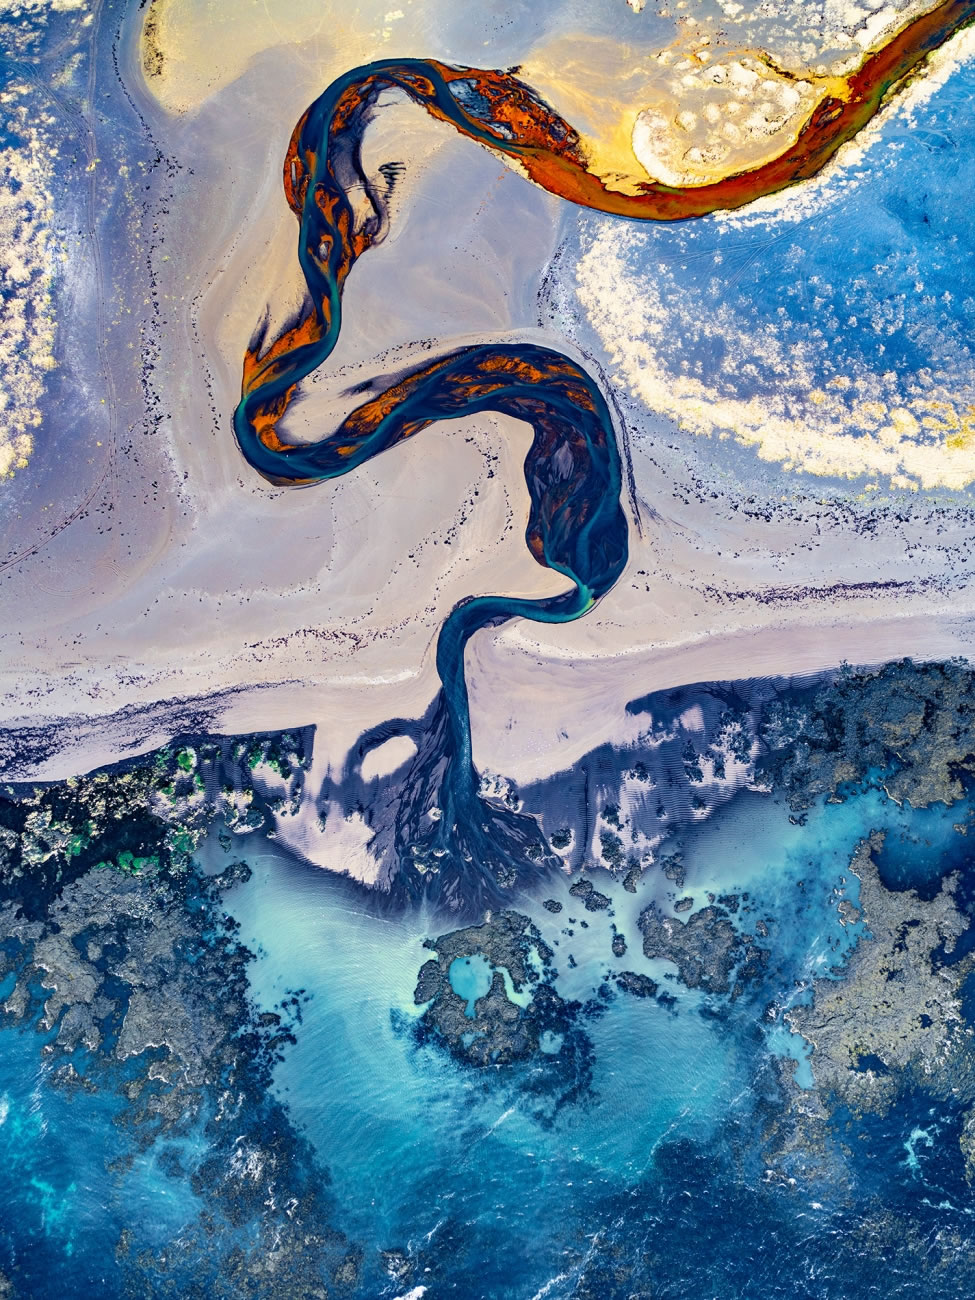 Drone Photography Awards 2023 Winners